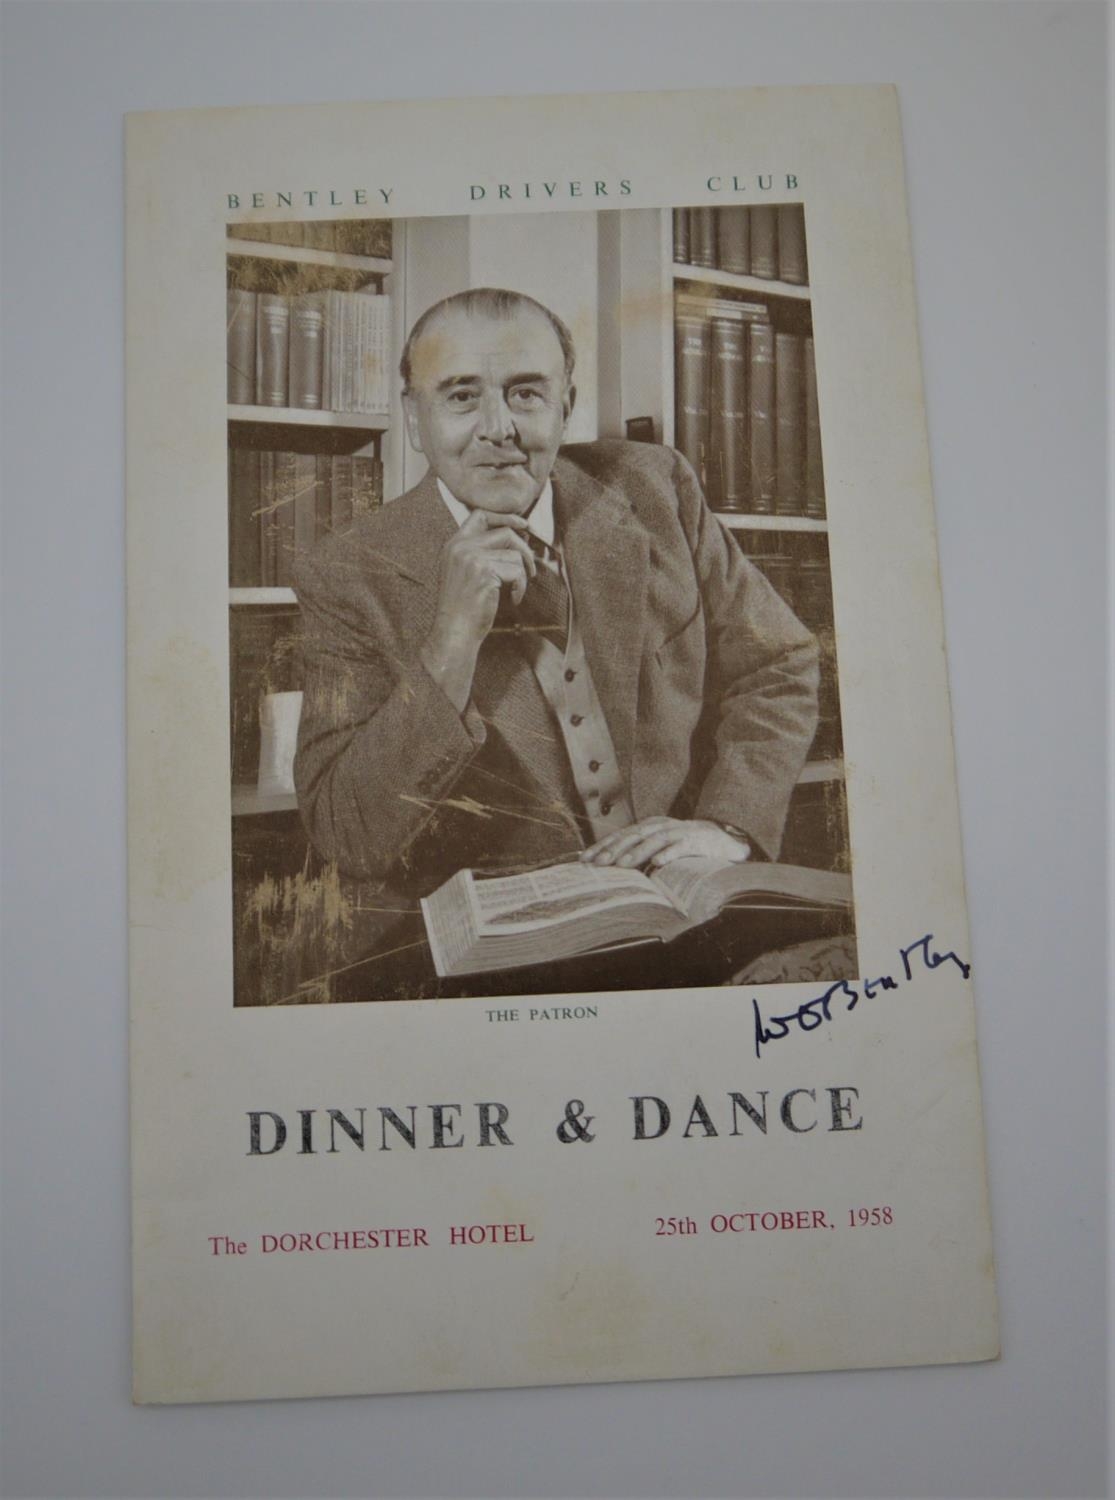 1958 BENTLEY DRIVERS CLUB ANNUAL DINNER INVITATION - SIGNED BY W.O.BENTLEY at the Dorchester Hotel